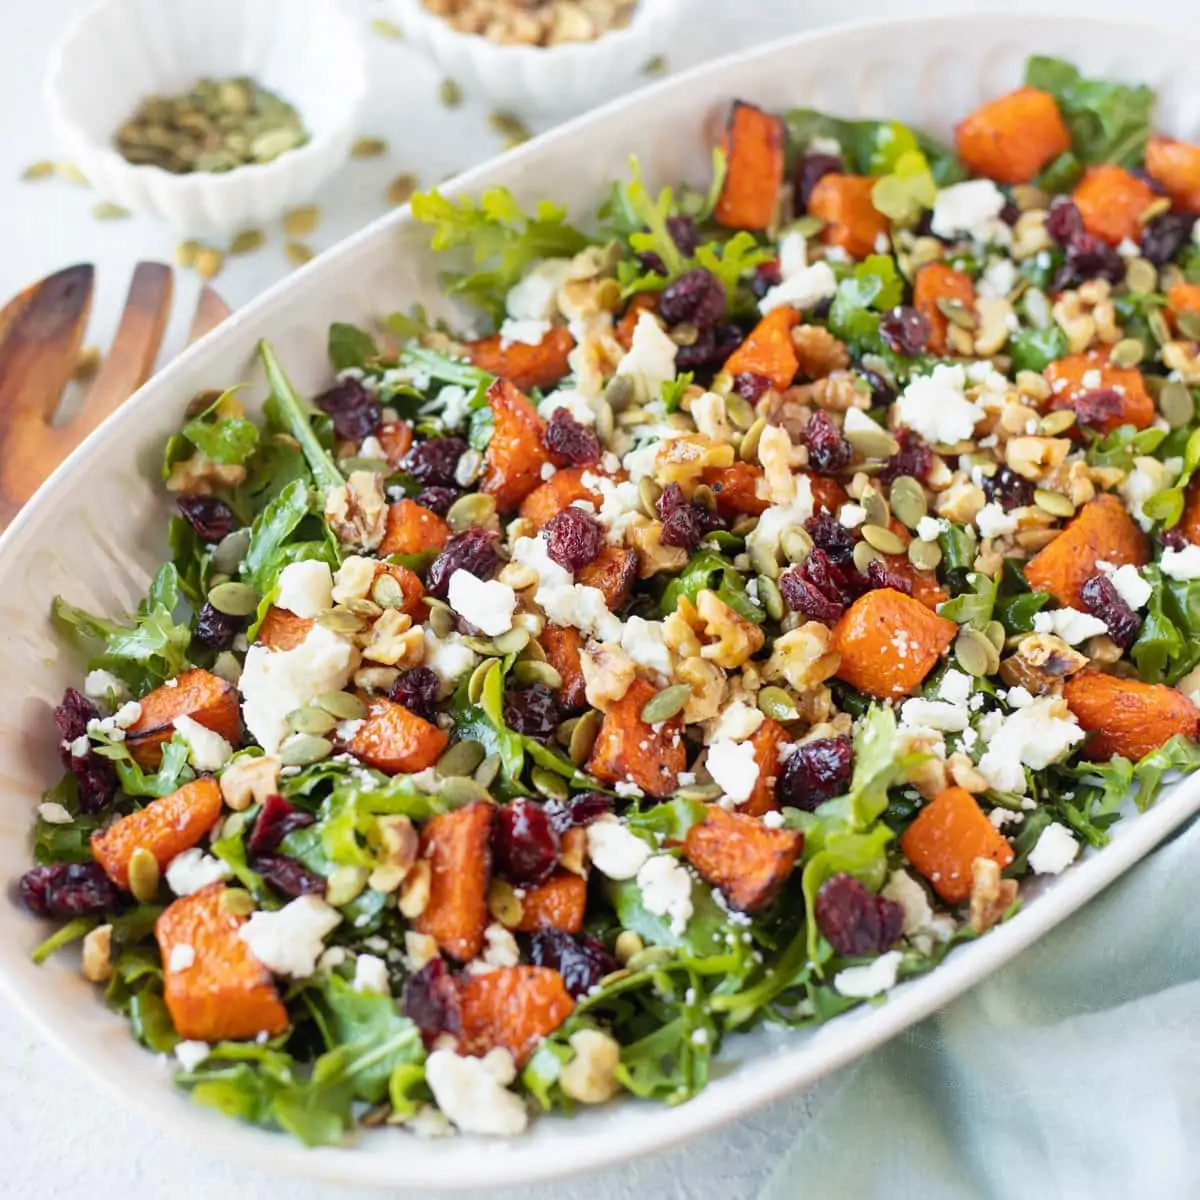 Pumpkin salad with feta and walnuts served in a platter